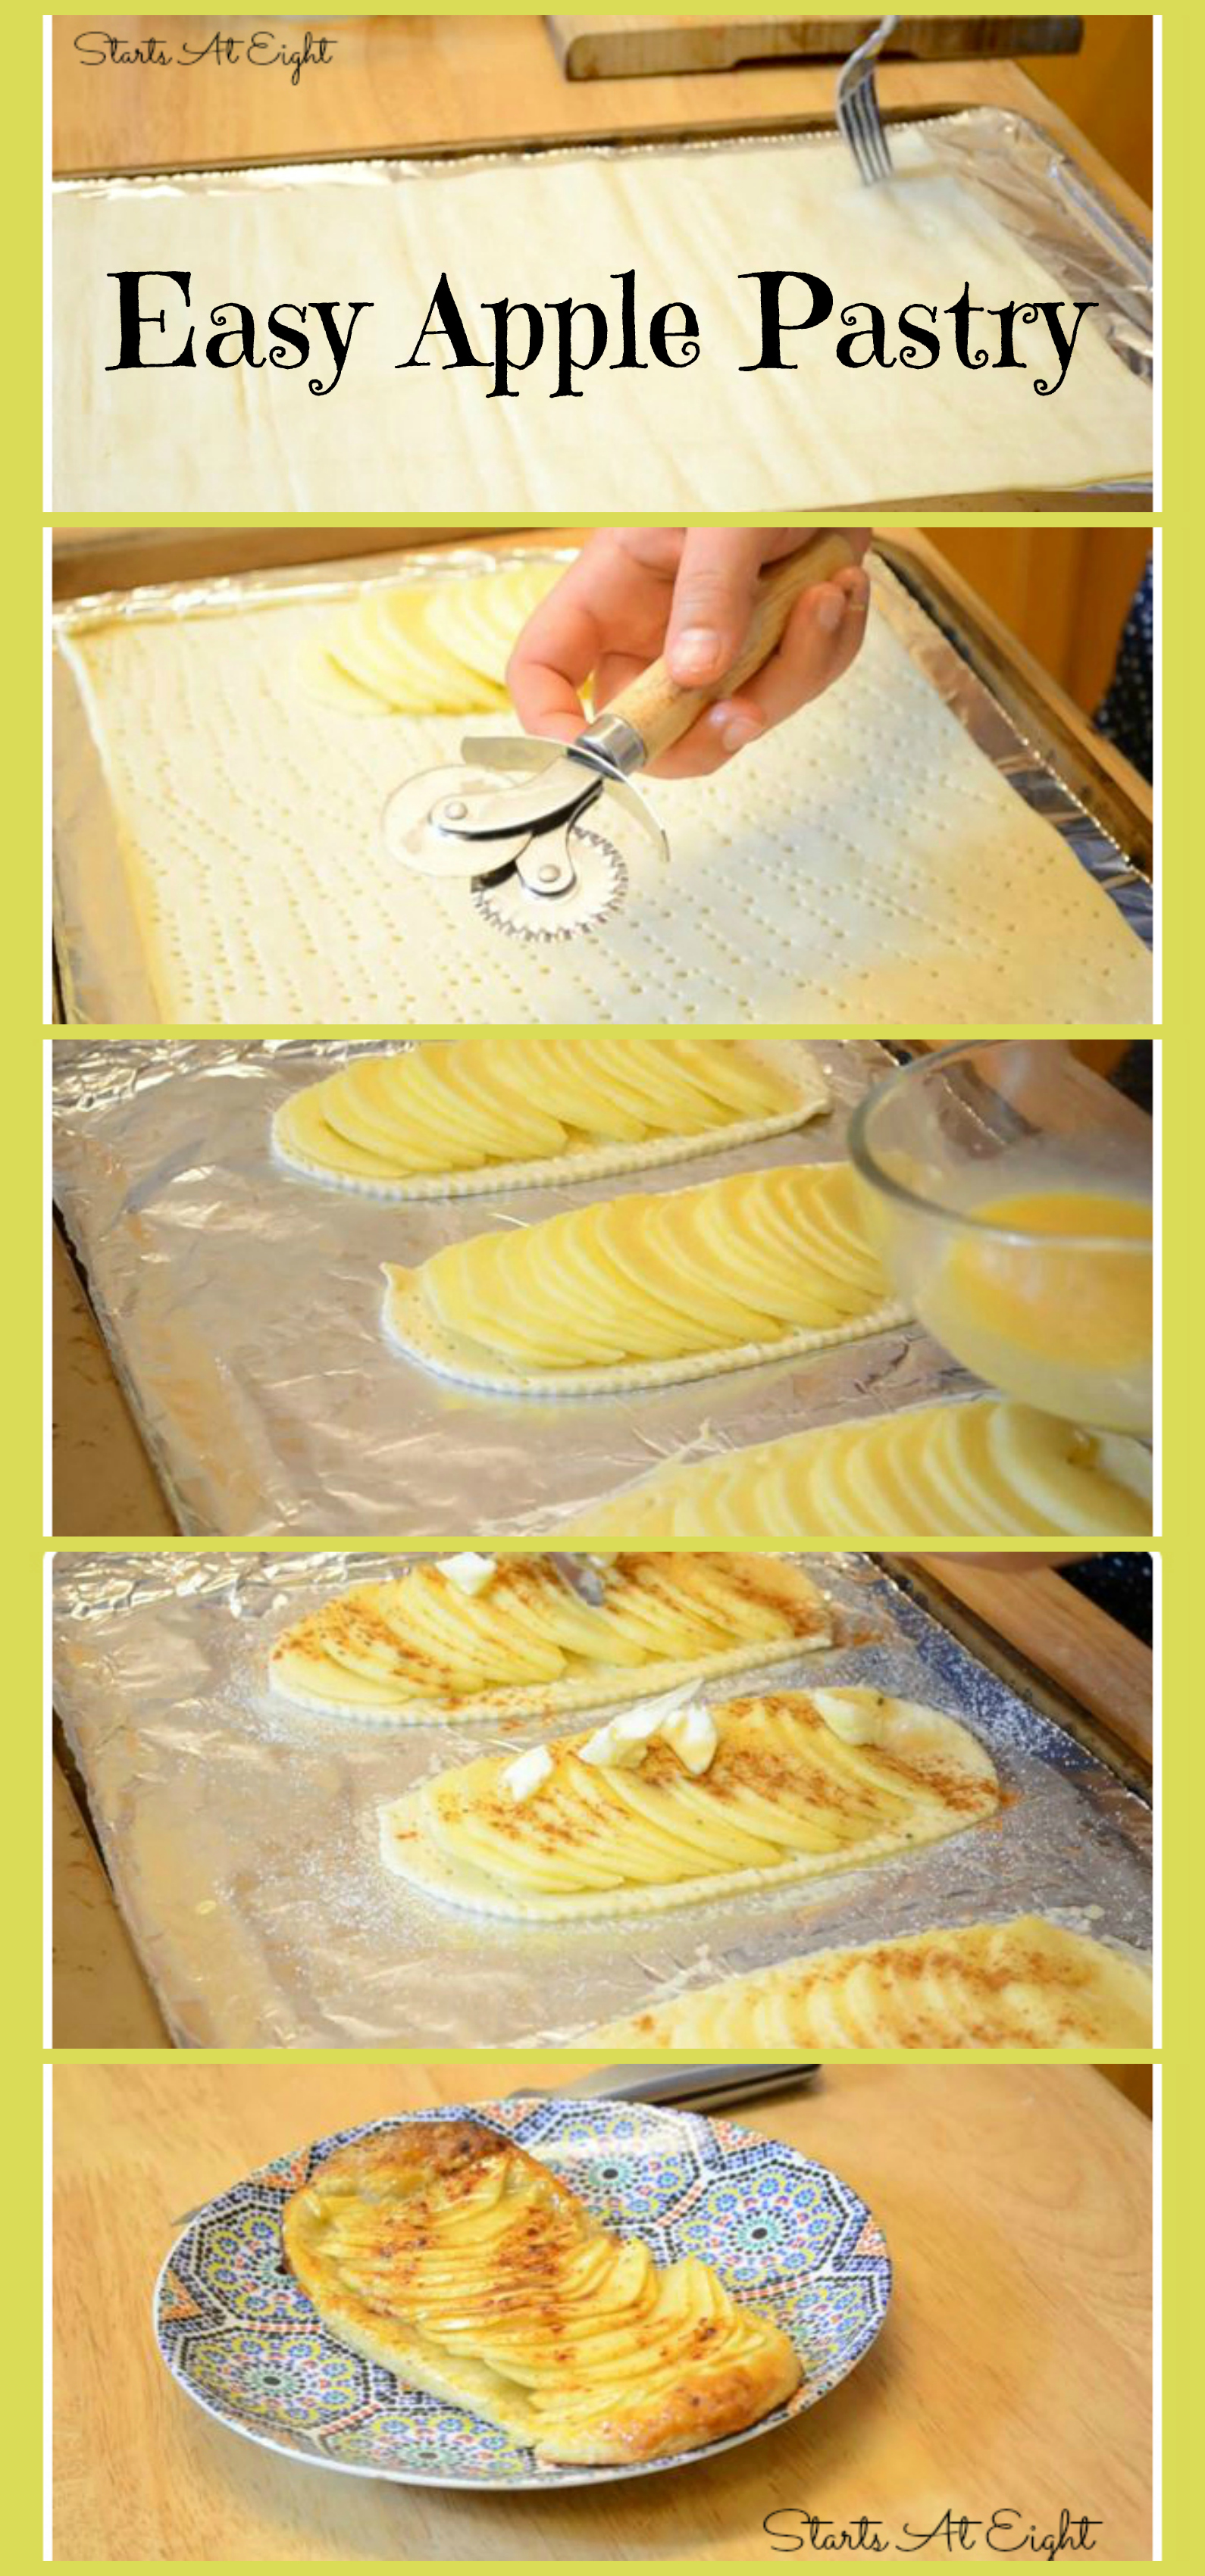 Easy Apple Pastry from Starts At Eight